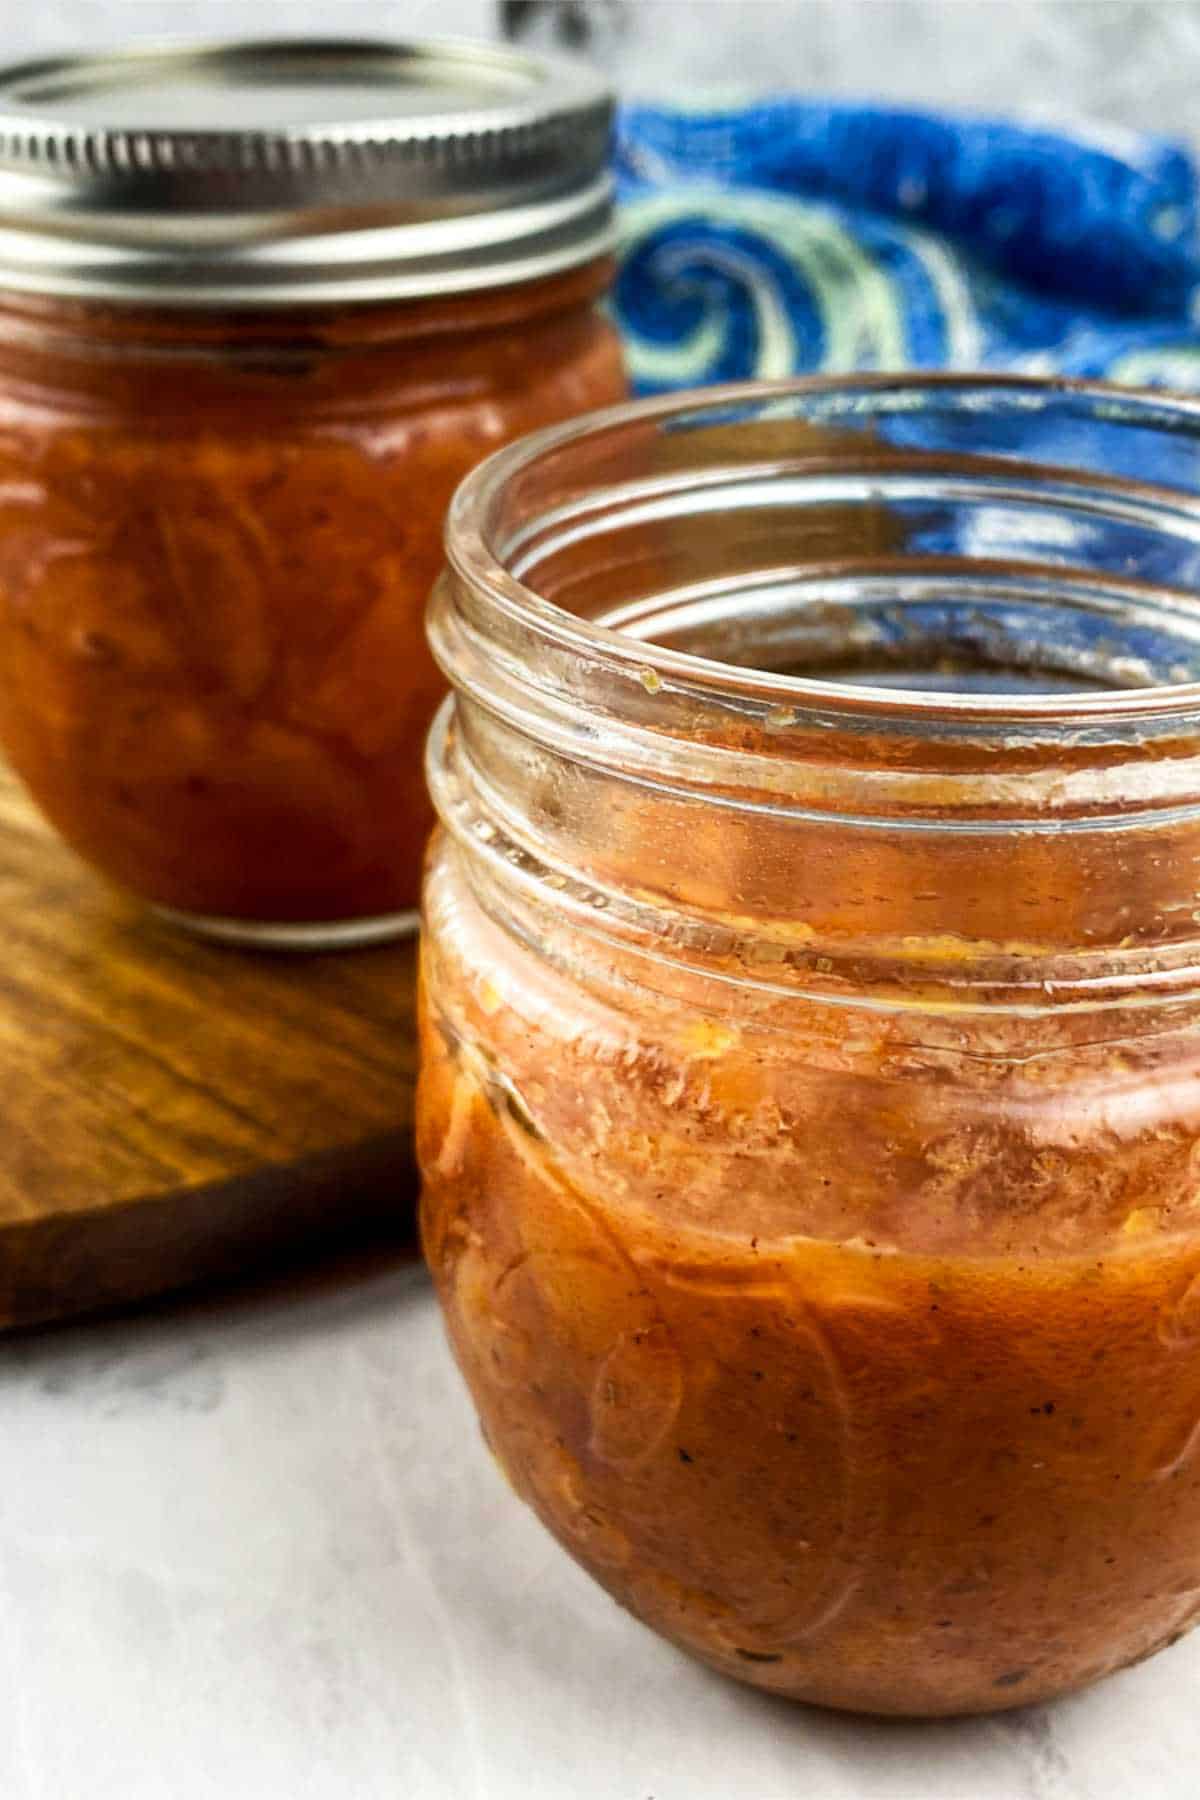 Savory peach compote in canning jar.